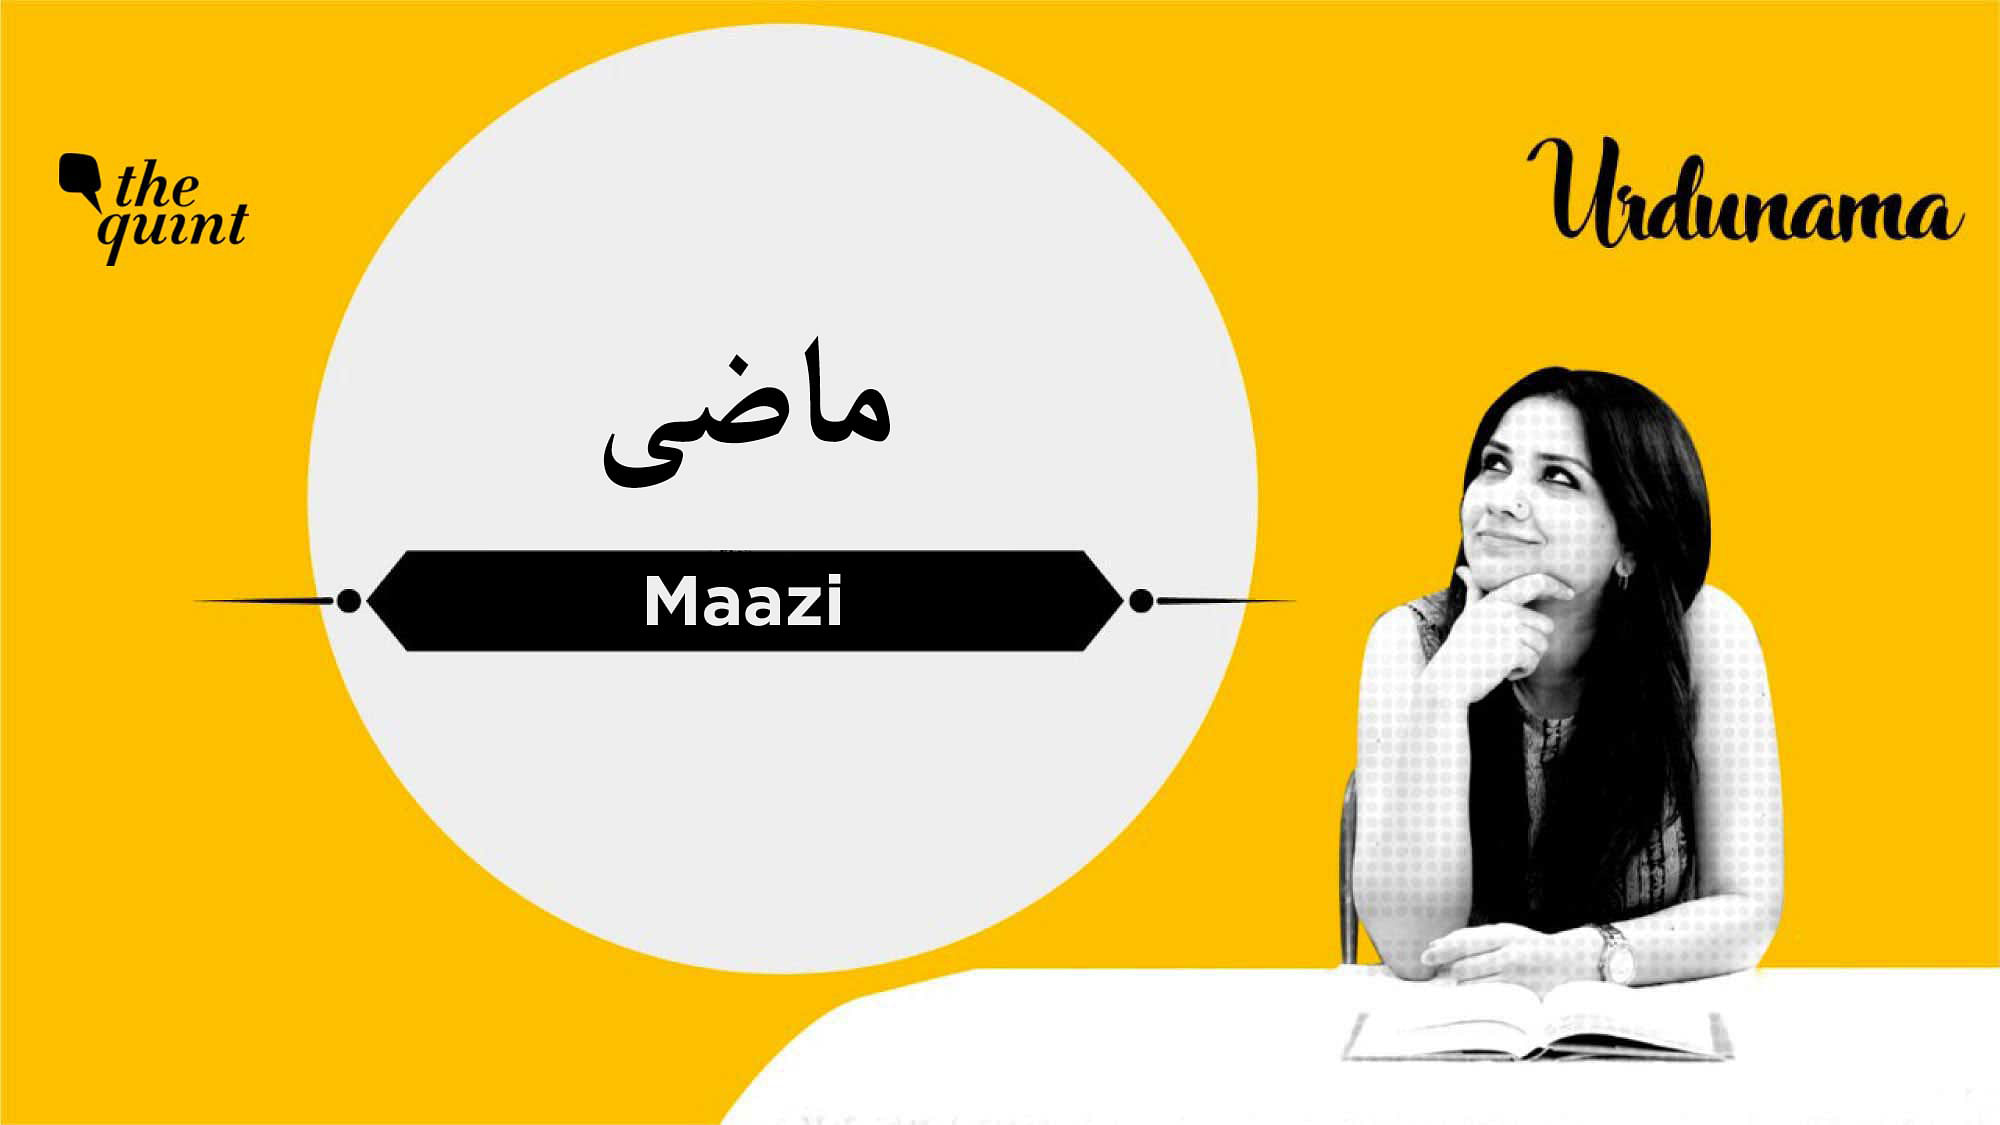 In Urdu poetry, the source of inspiration has always been the beloved whom the poet reminisces about in ghazals.